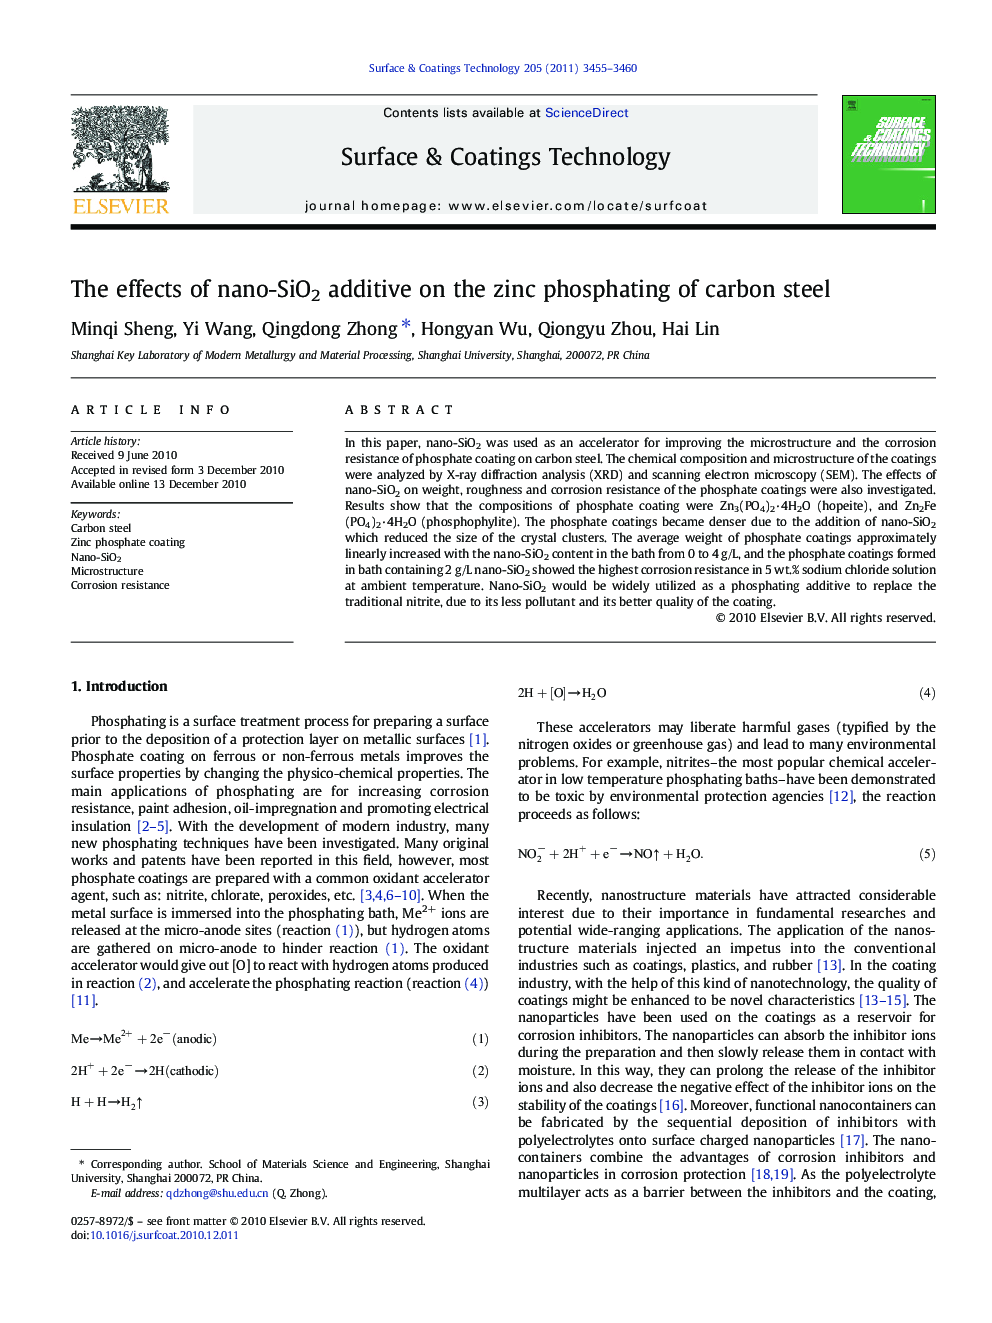 The effects of nano-SiO2 additive on the zinc phosphating of carbon steel